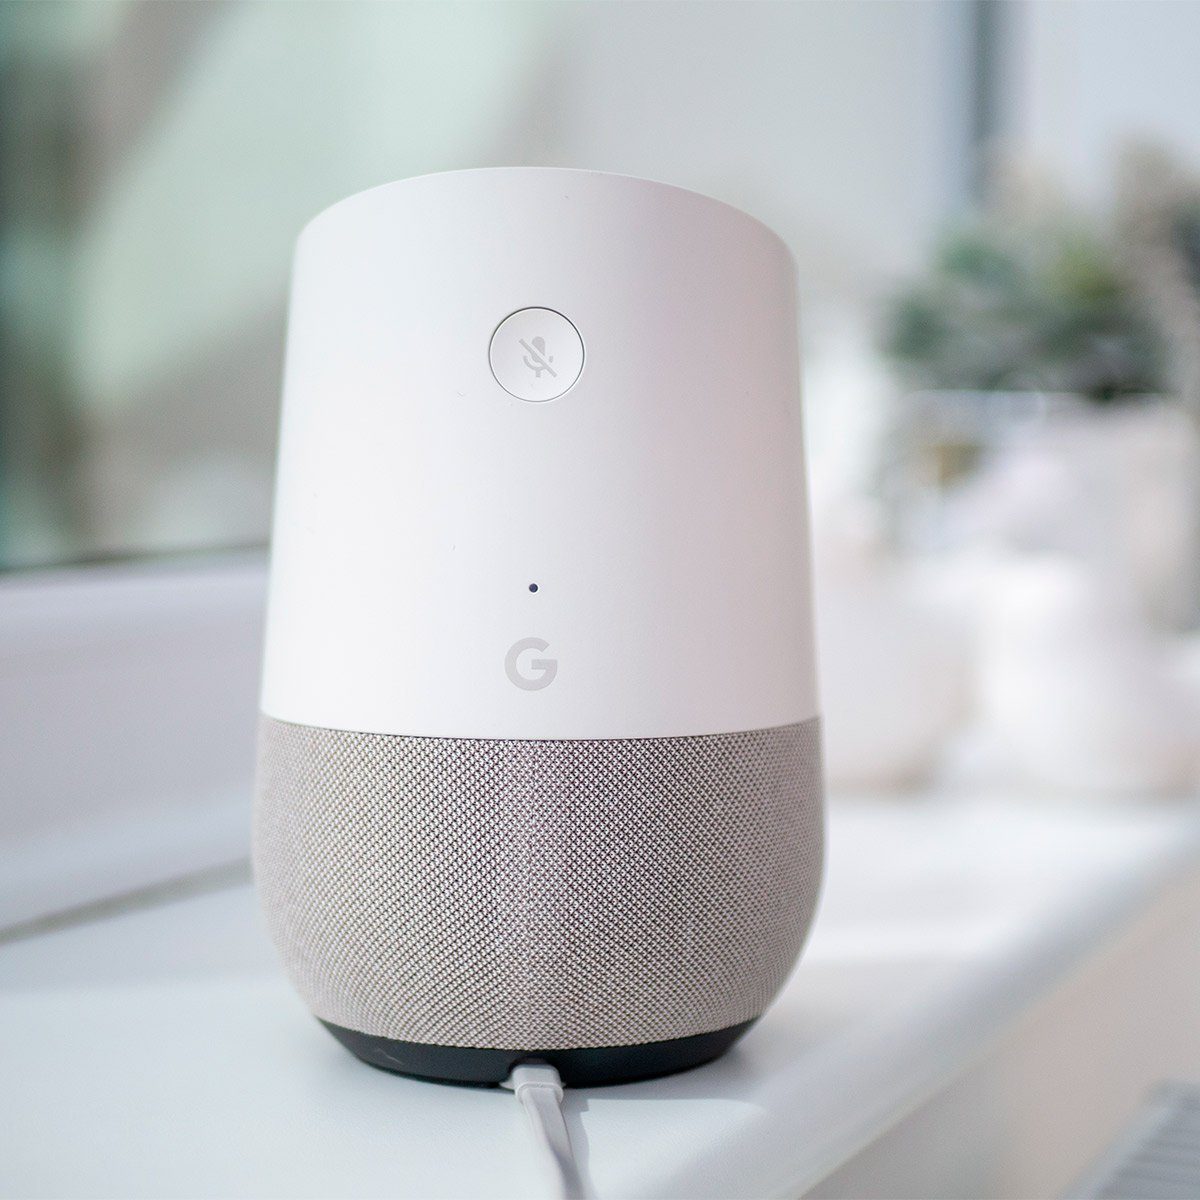 Funny Things to Ask Google Home | Reader's Digest